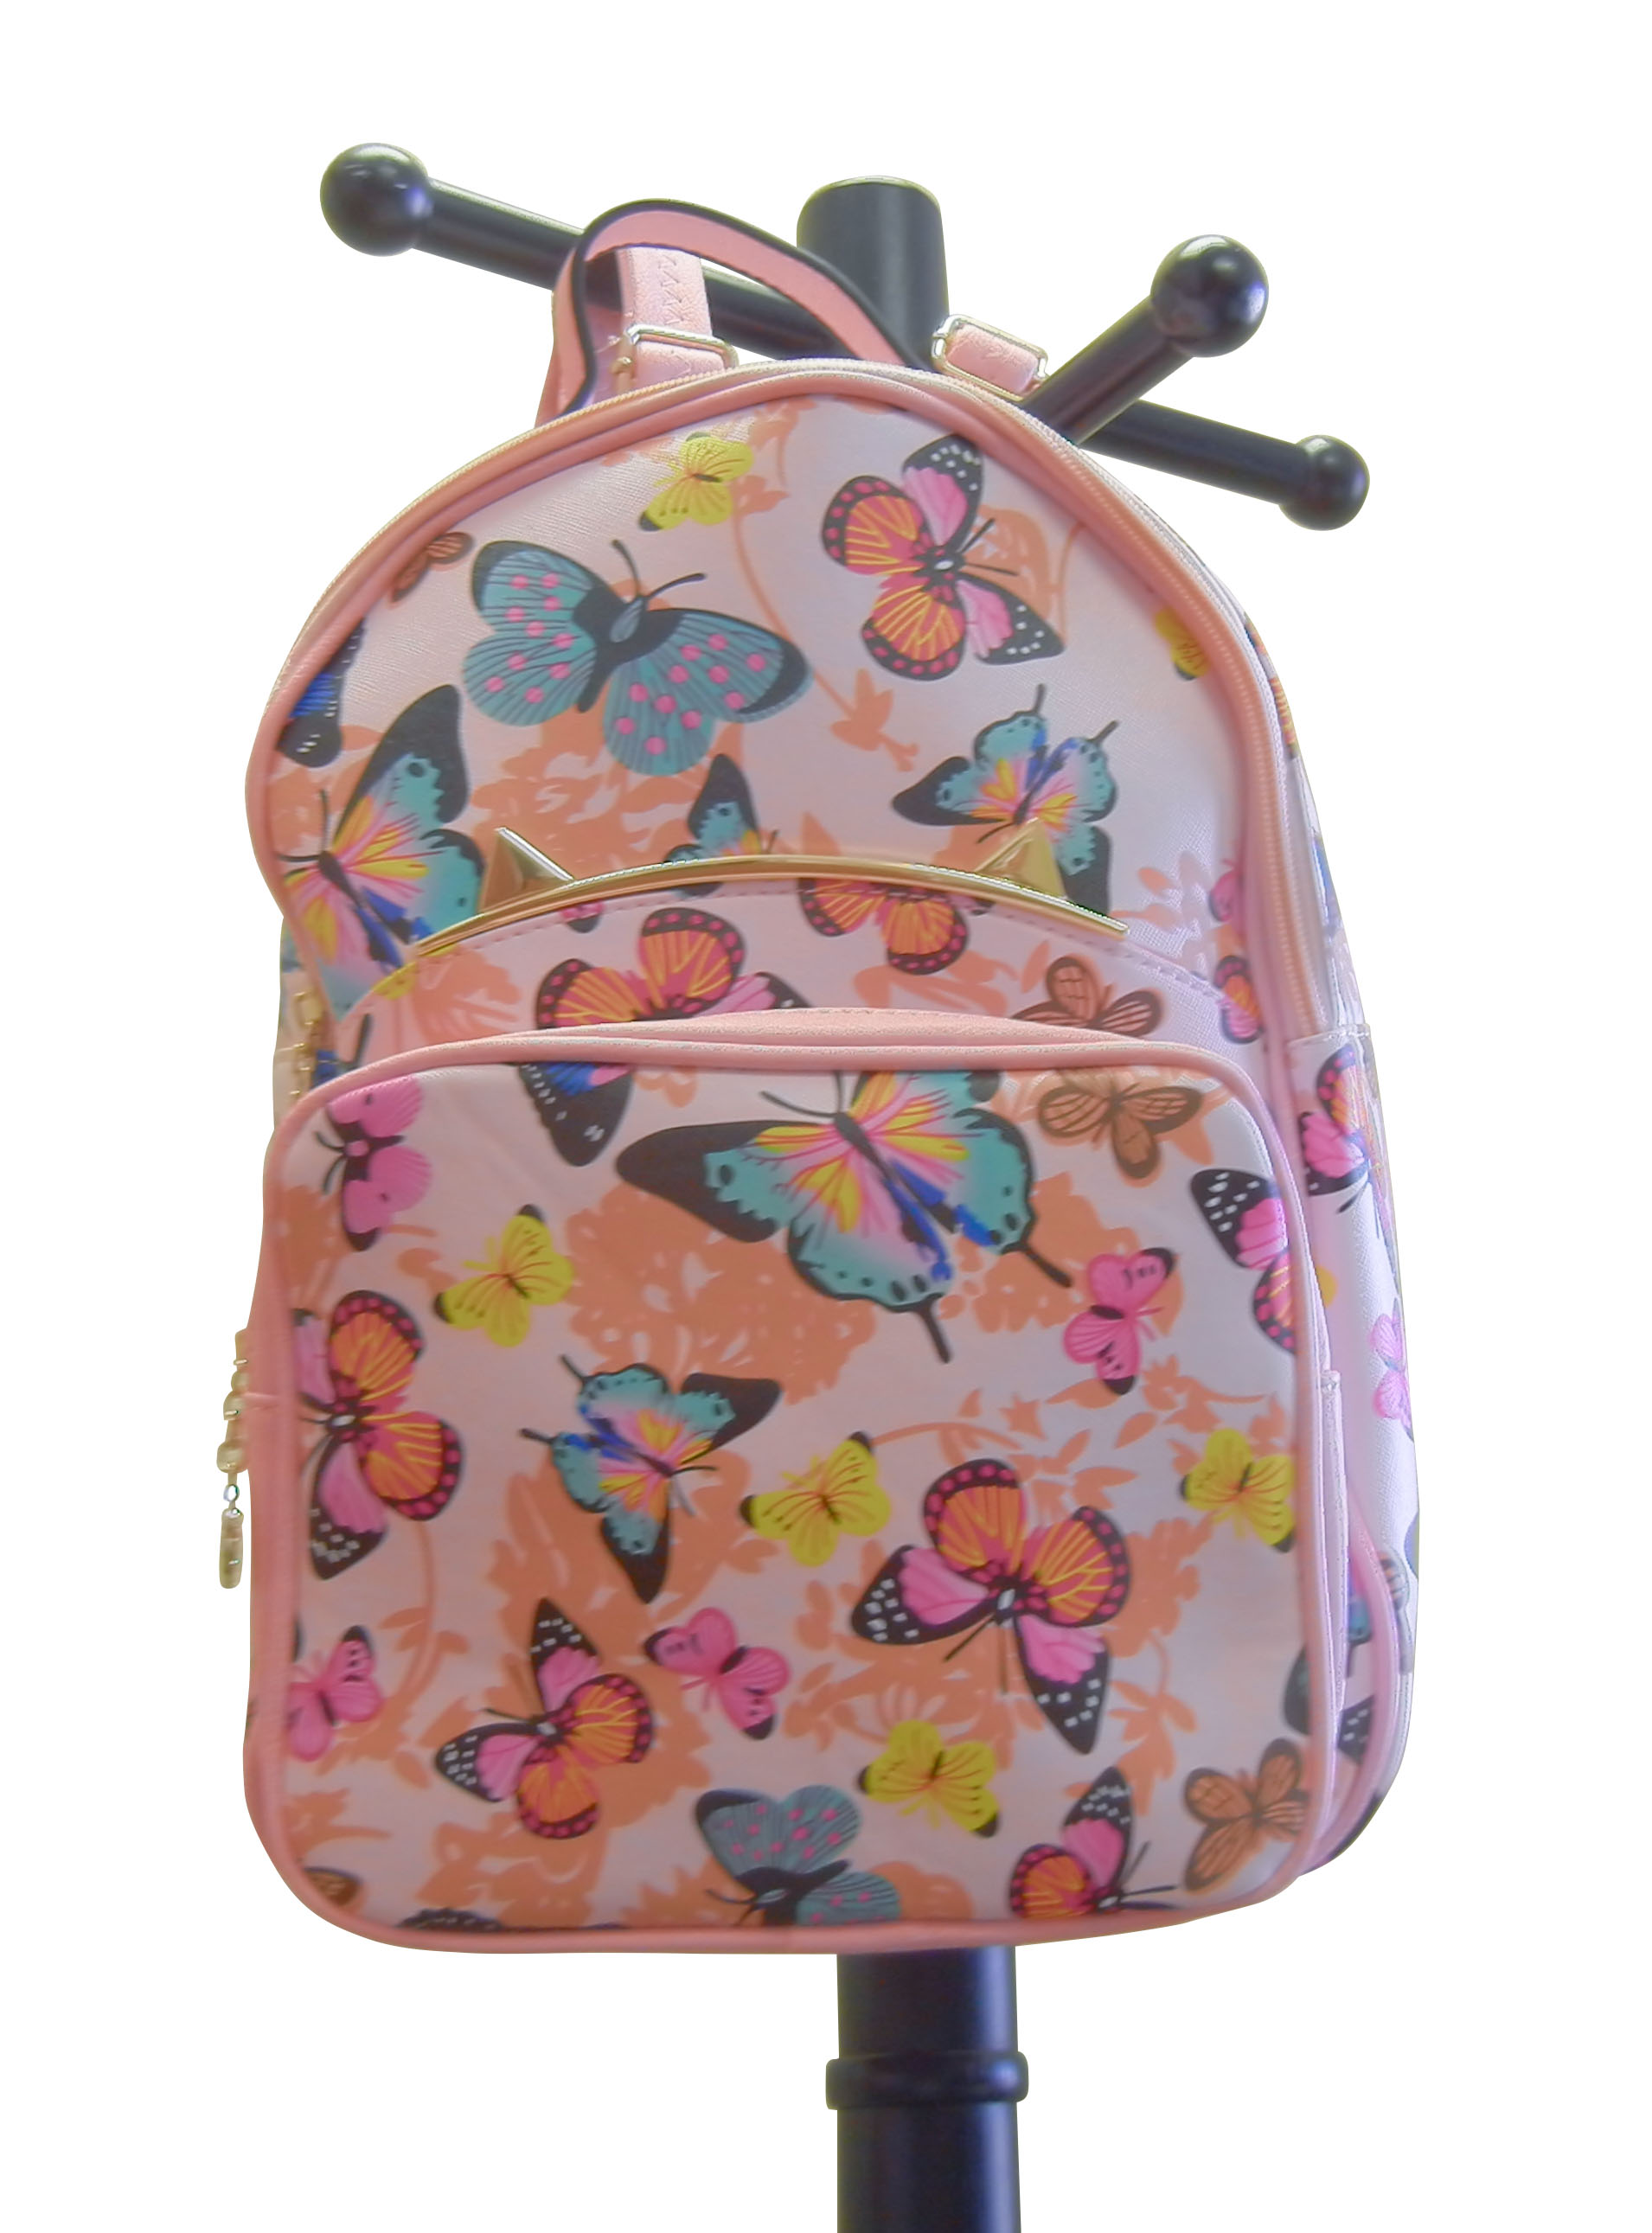 backpack for girls, pink, butterflies, bright, colorful,